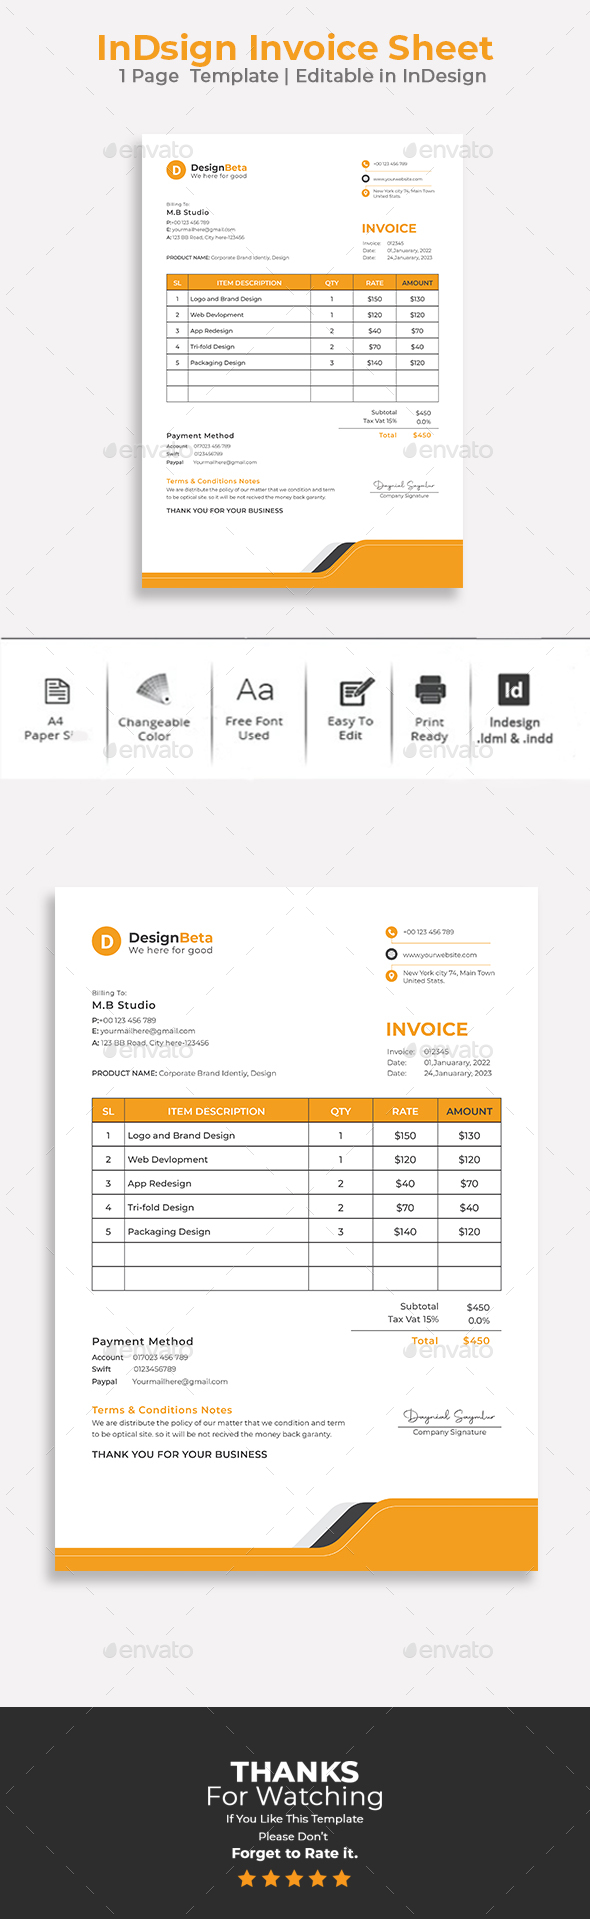 Invoice Template | InDesign